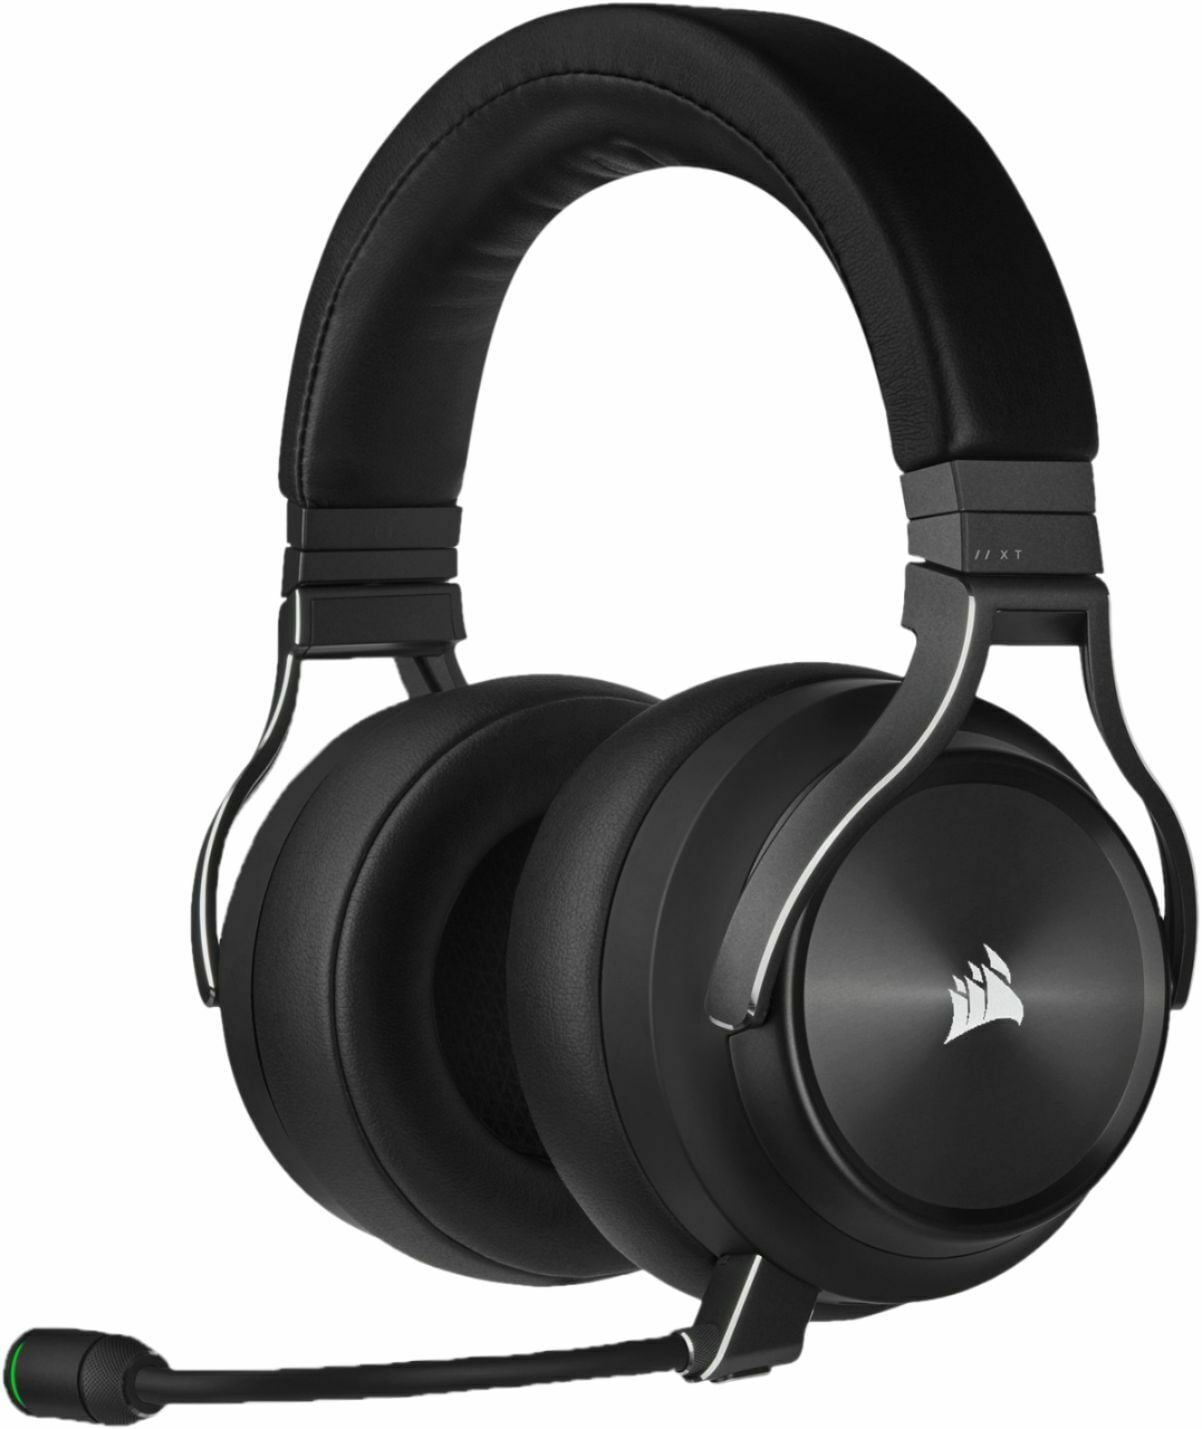 Pre-Owned CORSAIR HS65 SURROUND Wired 7.1 Surround Gaming Headset Black  With Cleaning Kit Bolt Axtion Bundle (Refurbished: Like New) 